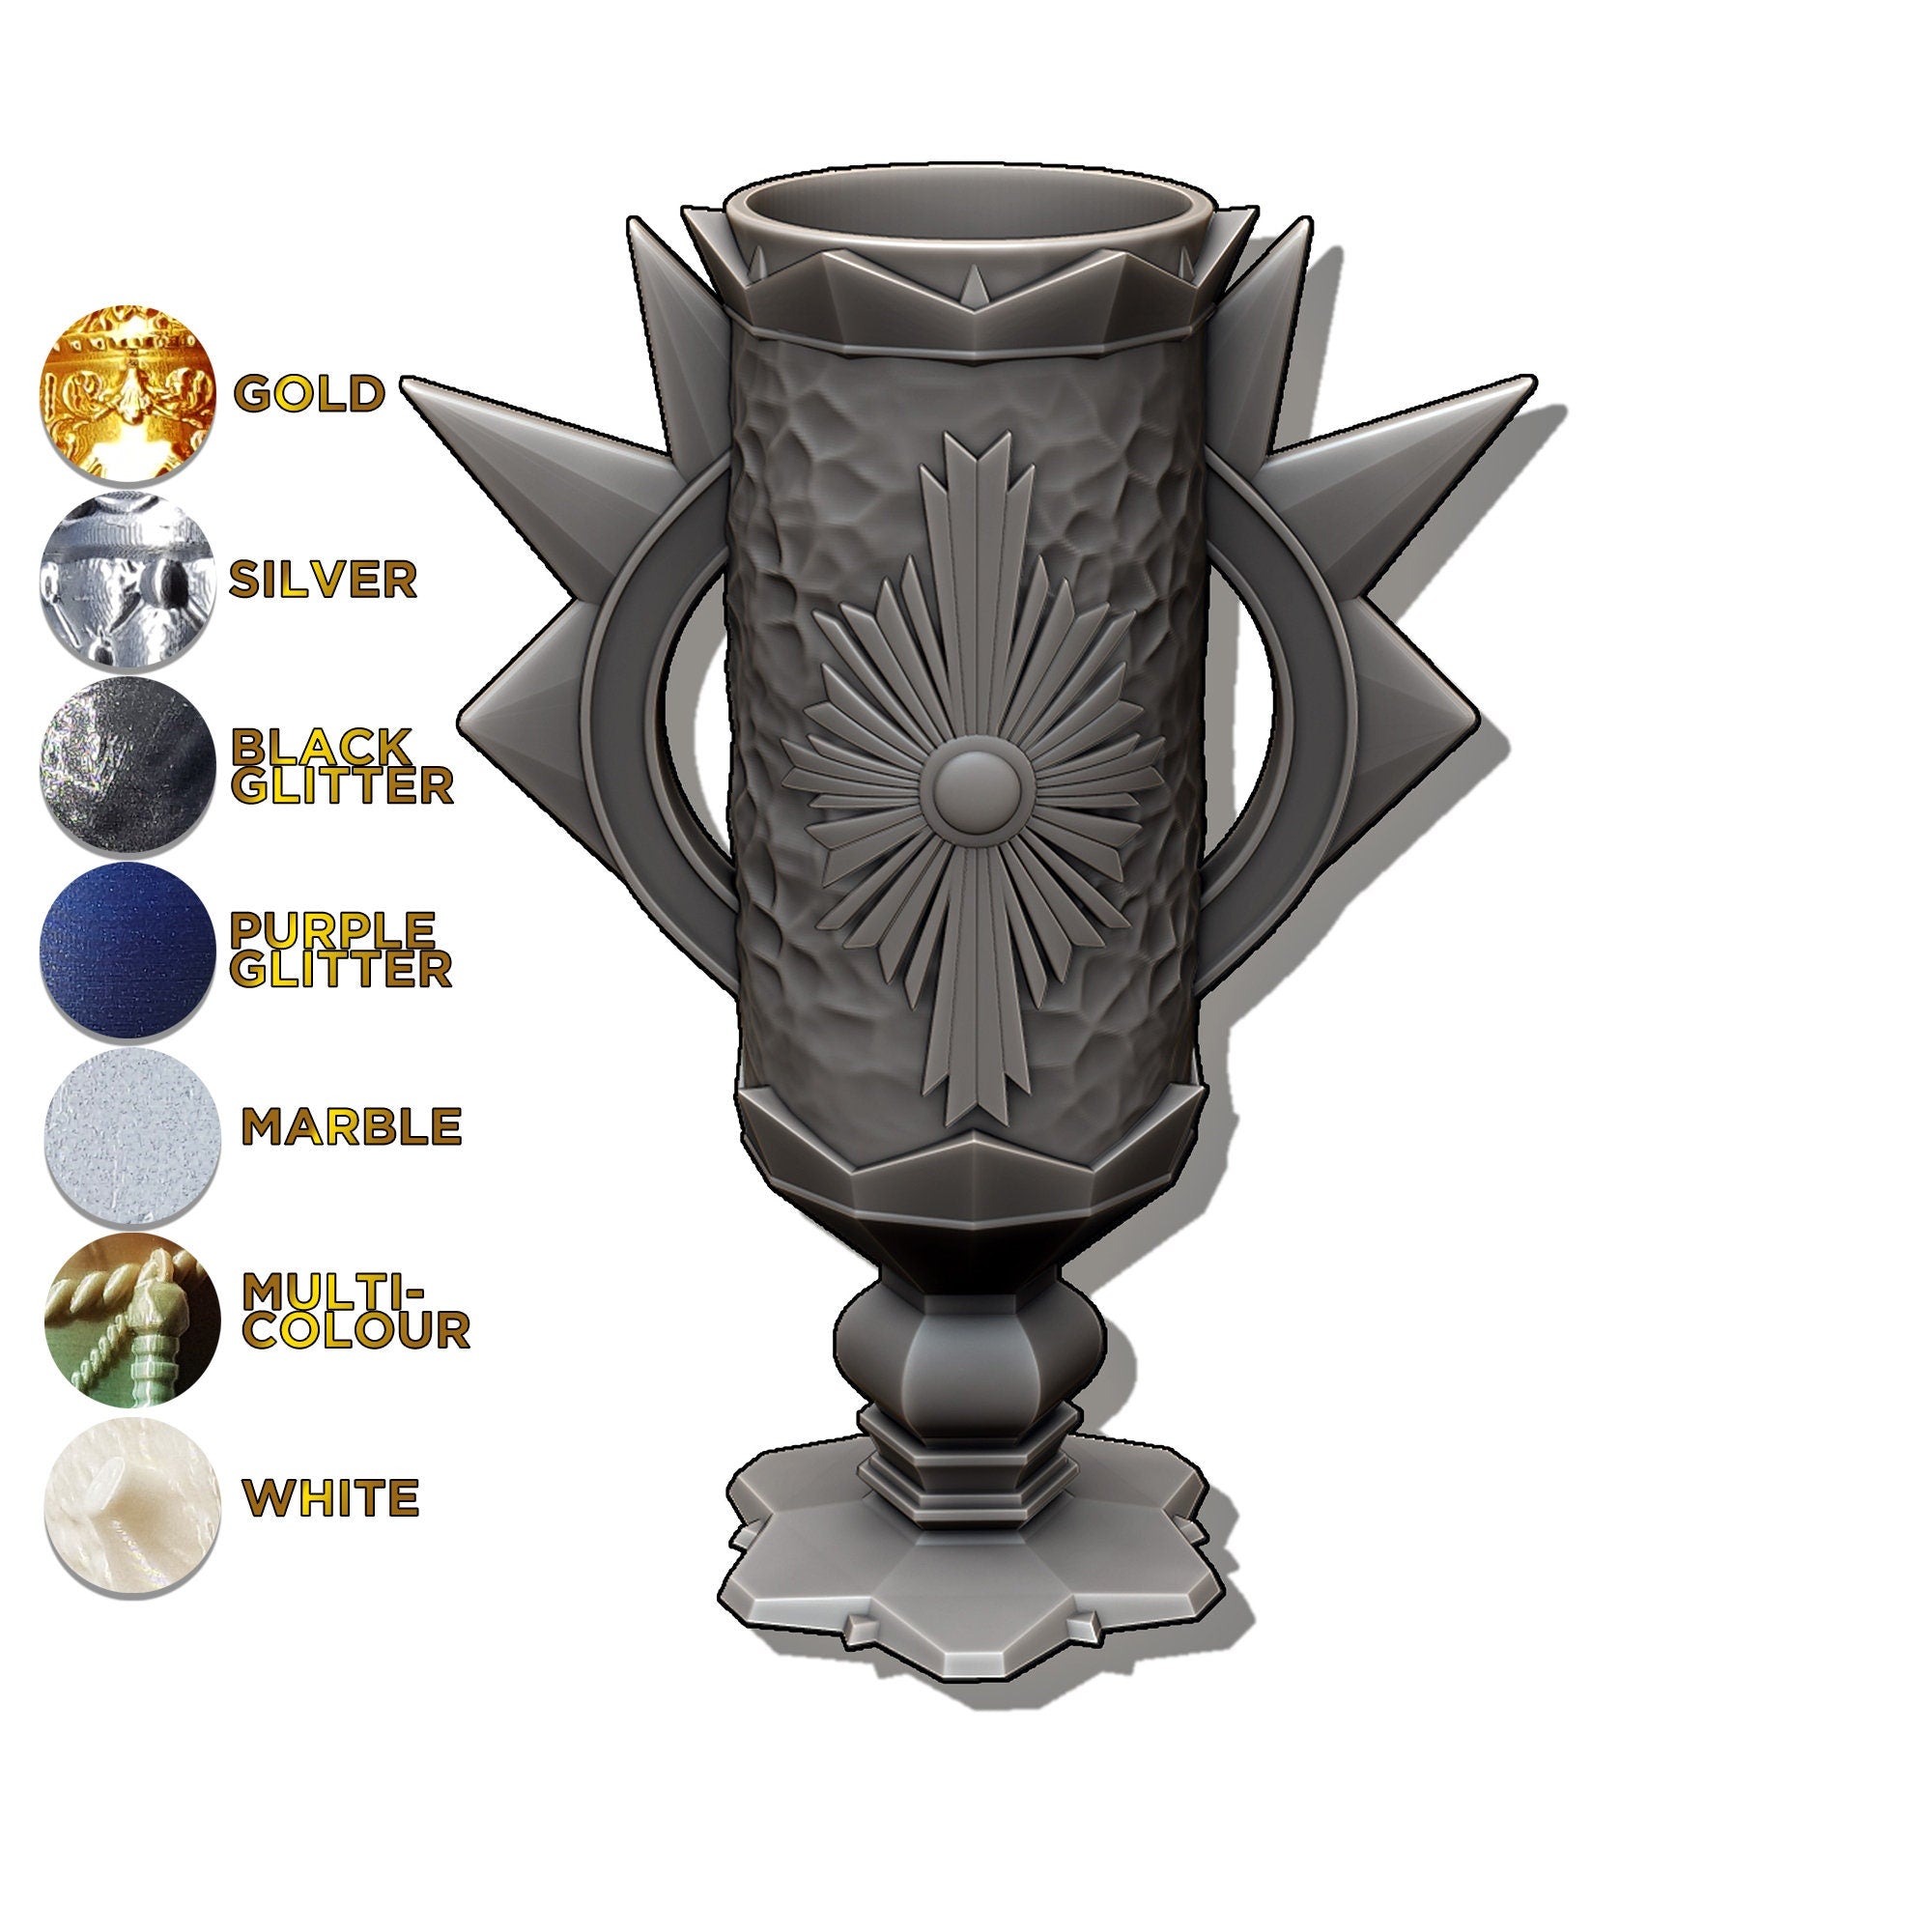 The PALADIN | Mythic Mug | Larp | Gaming Zubehör | Tabletop | Dice Cup | Box | Holder | Dungeons and Dragons | DnD | RPG | Fantasy-Role Playing Games